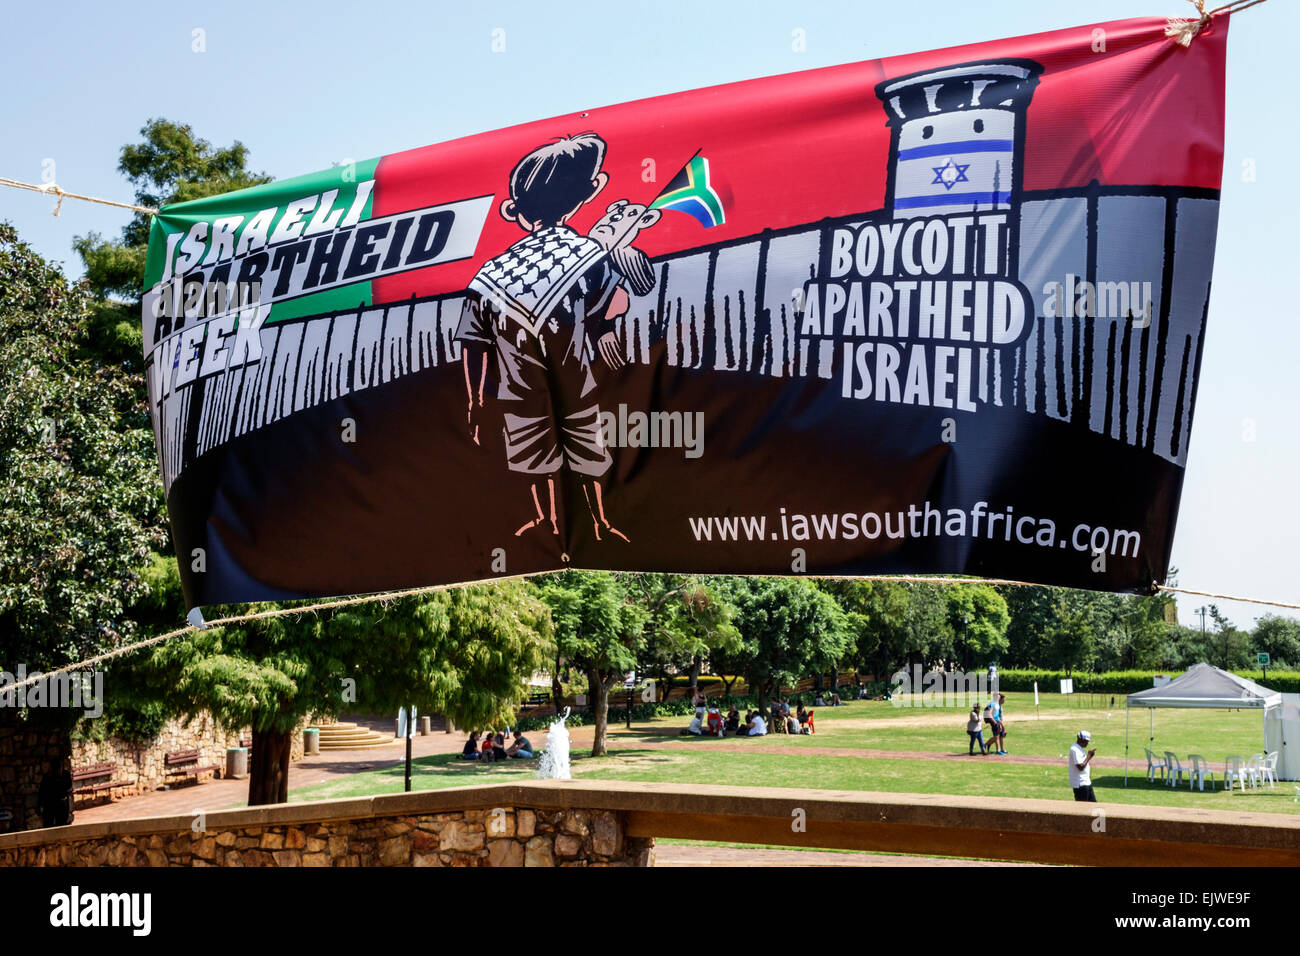 Johannesburg Sud Africa,Braamfontein,wits University,University of the Witwatersrand,istruzione superiore,East Campus,banner,protesta,politica,israeliana A. Foto Stock